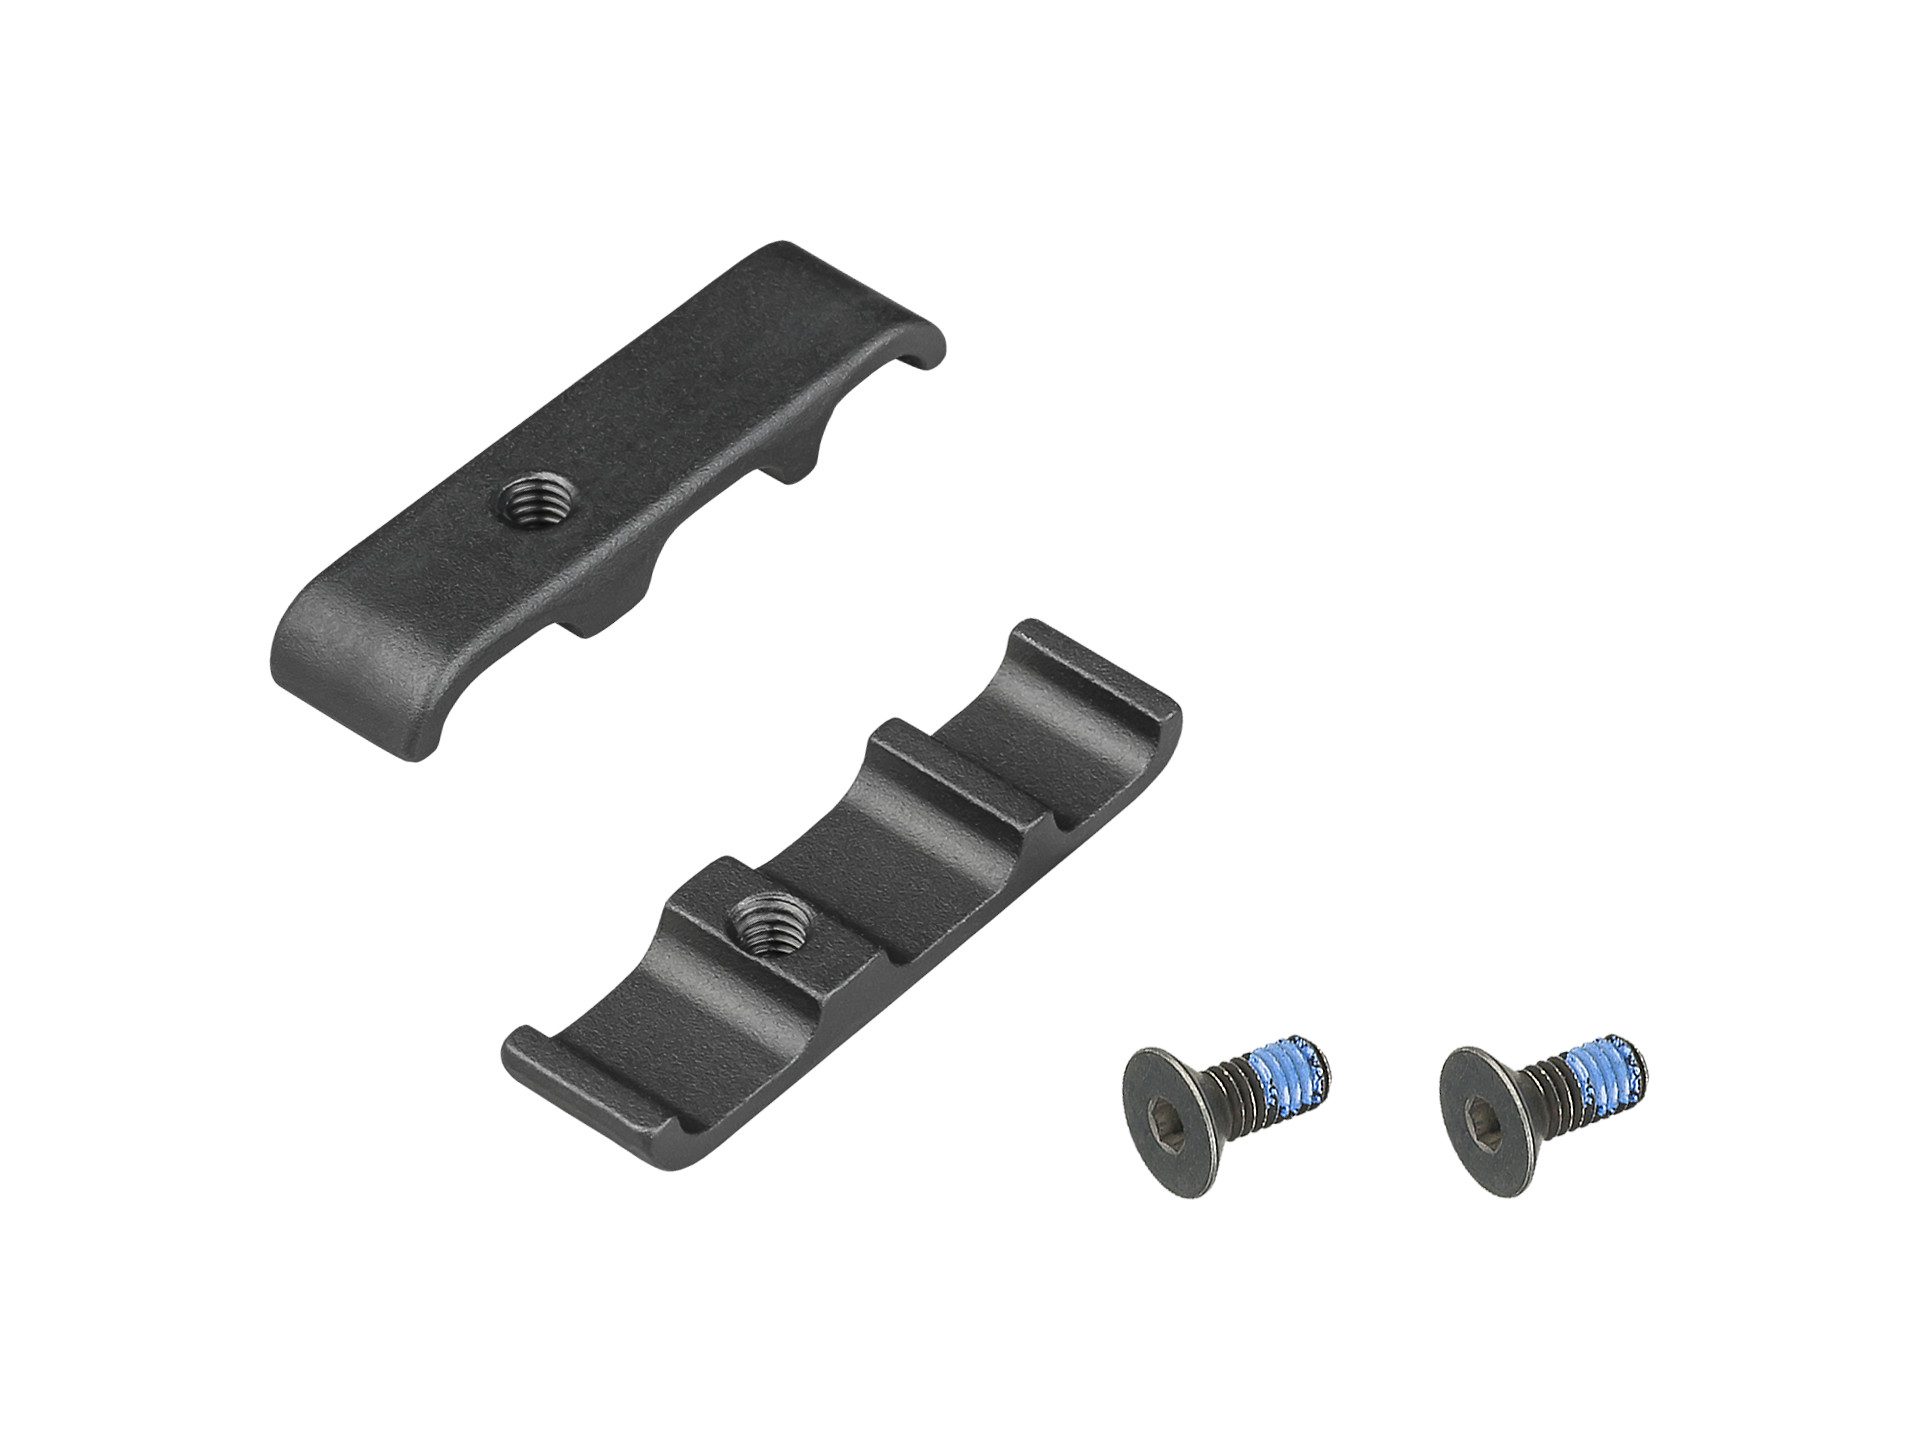 Trek Powerfly 2019 Internal Cable Guides